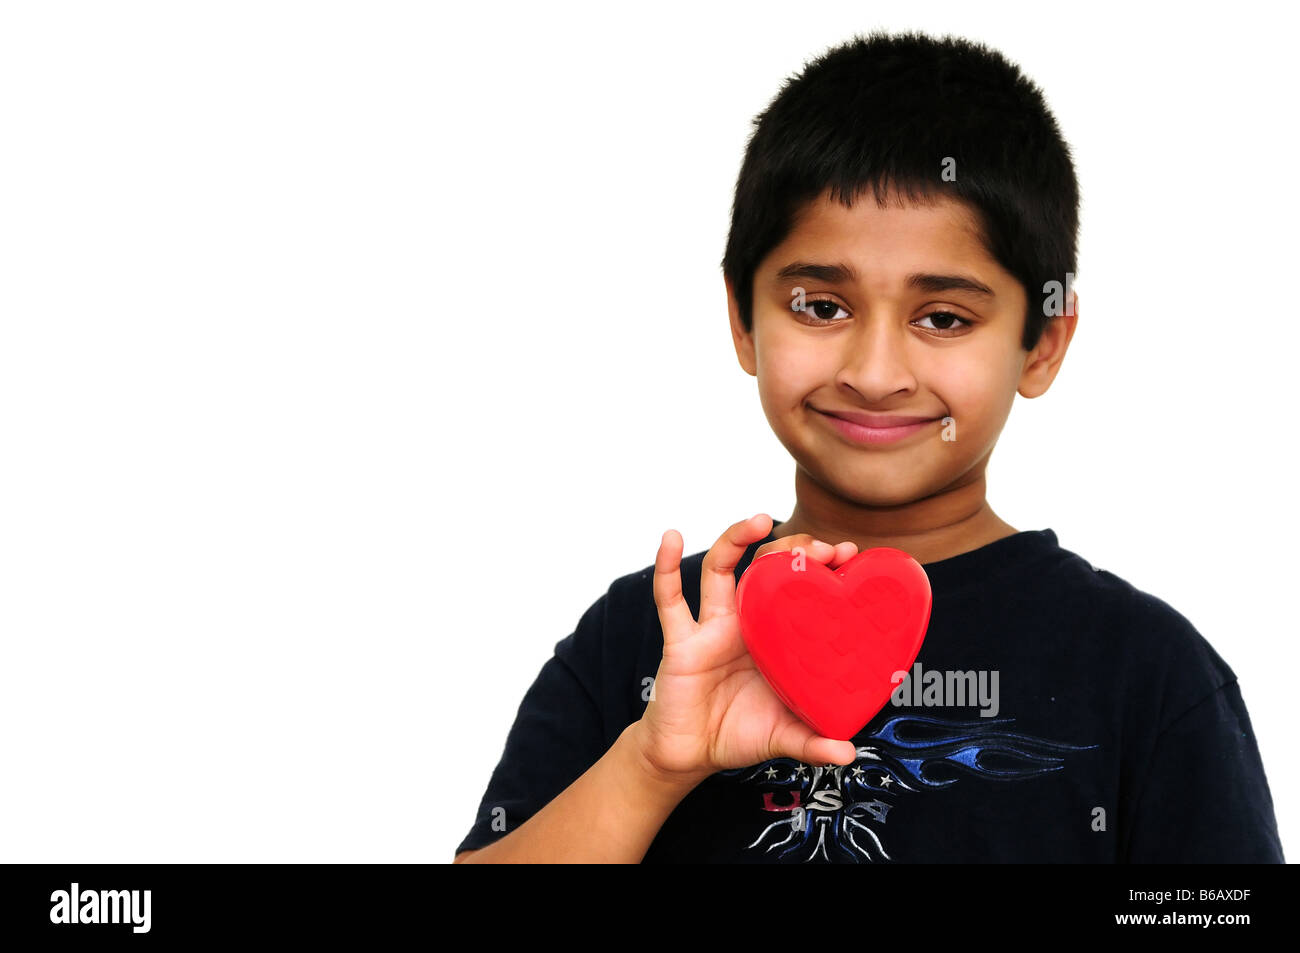 Handsome young Indian boy holding a red heart Stock Photo